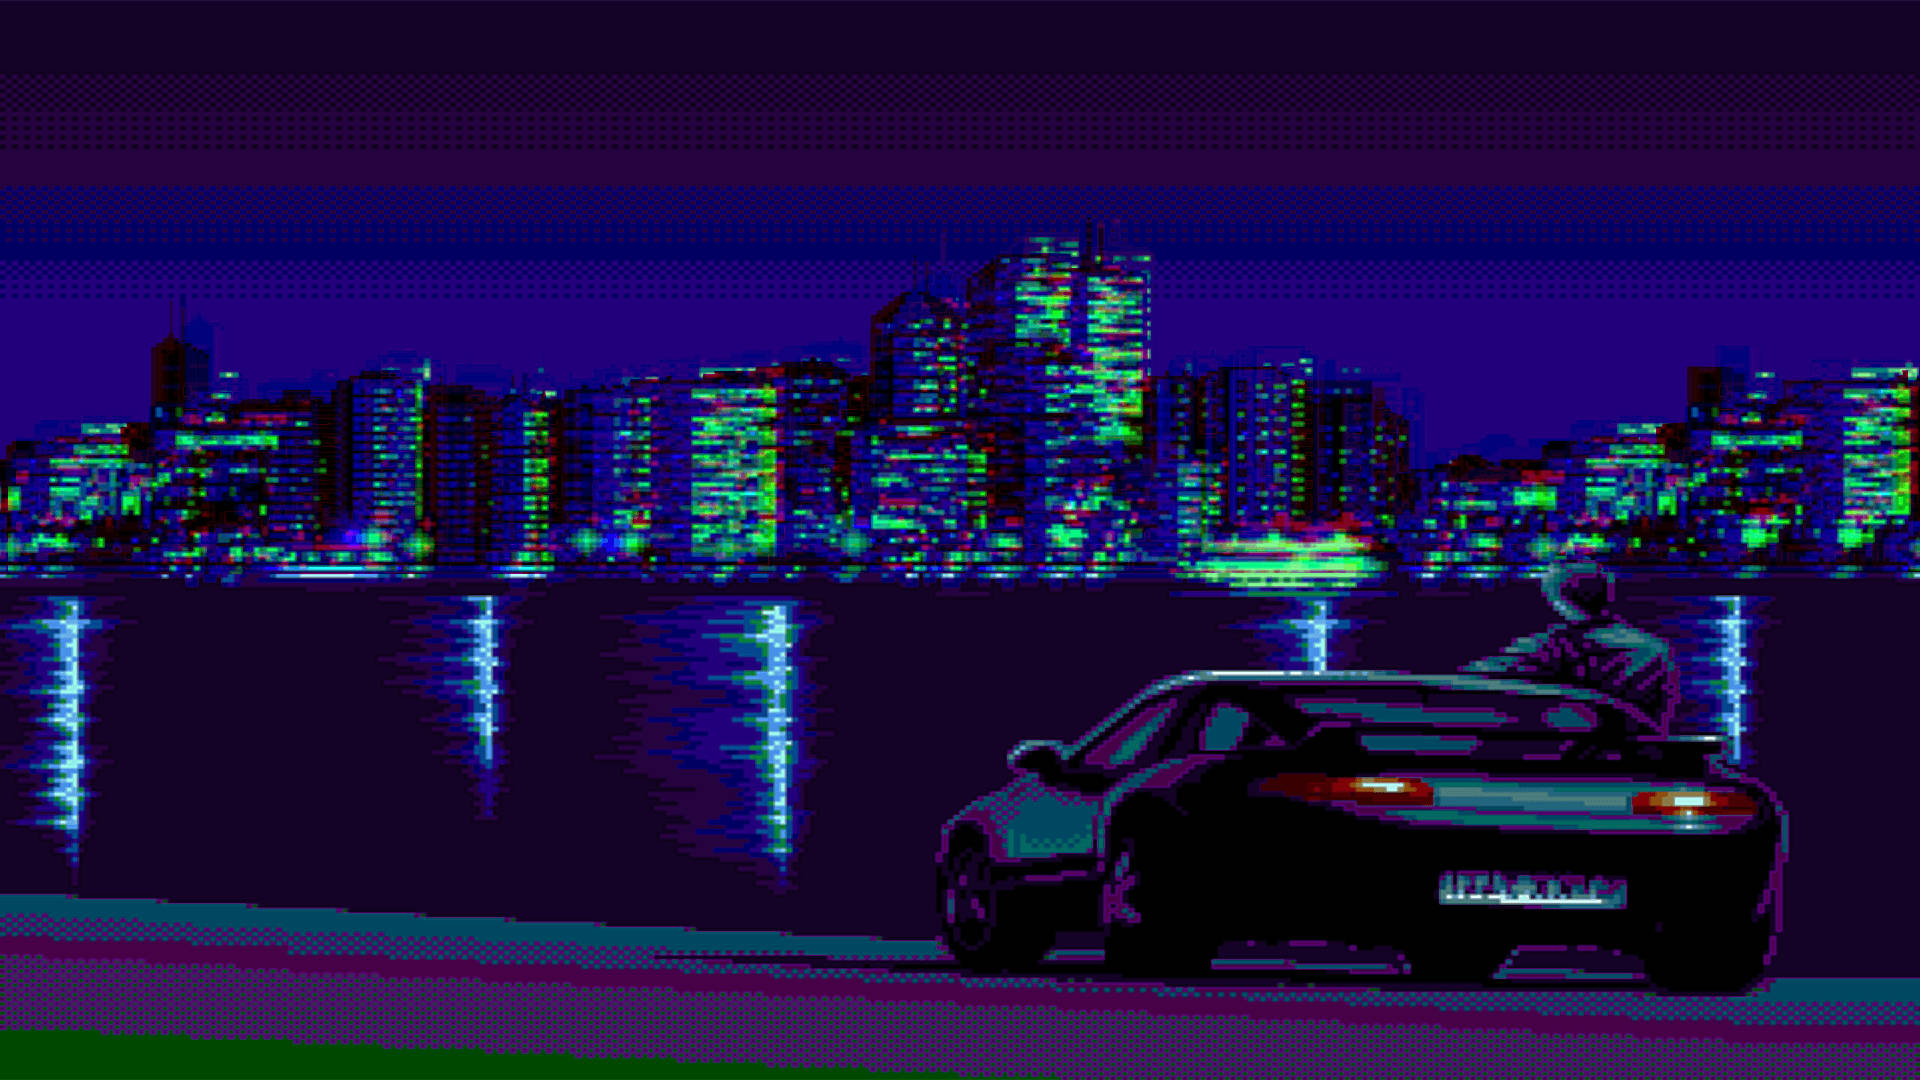 Fantasy Aesthetic Black Car And City Lights